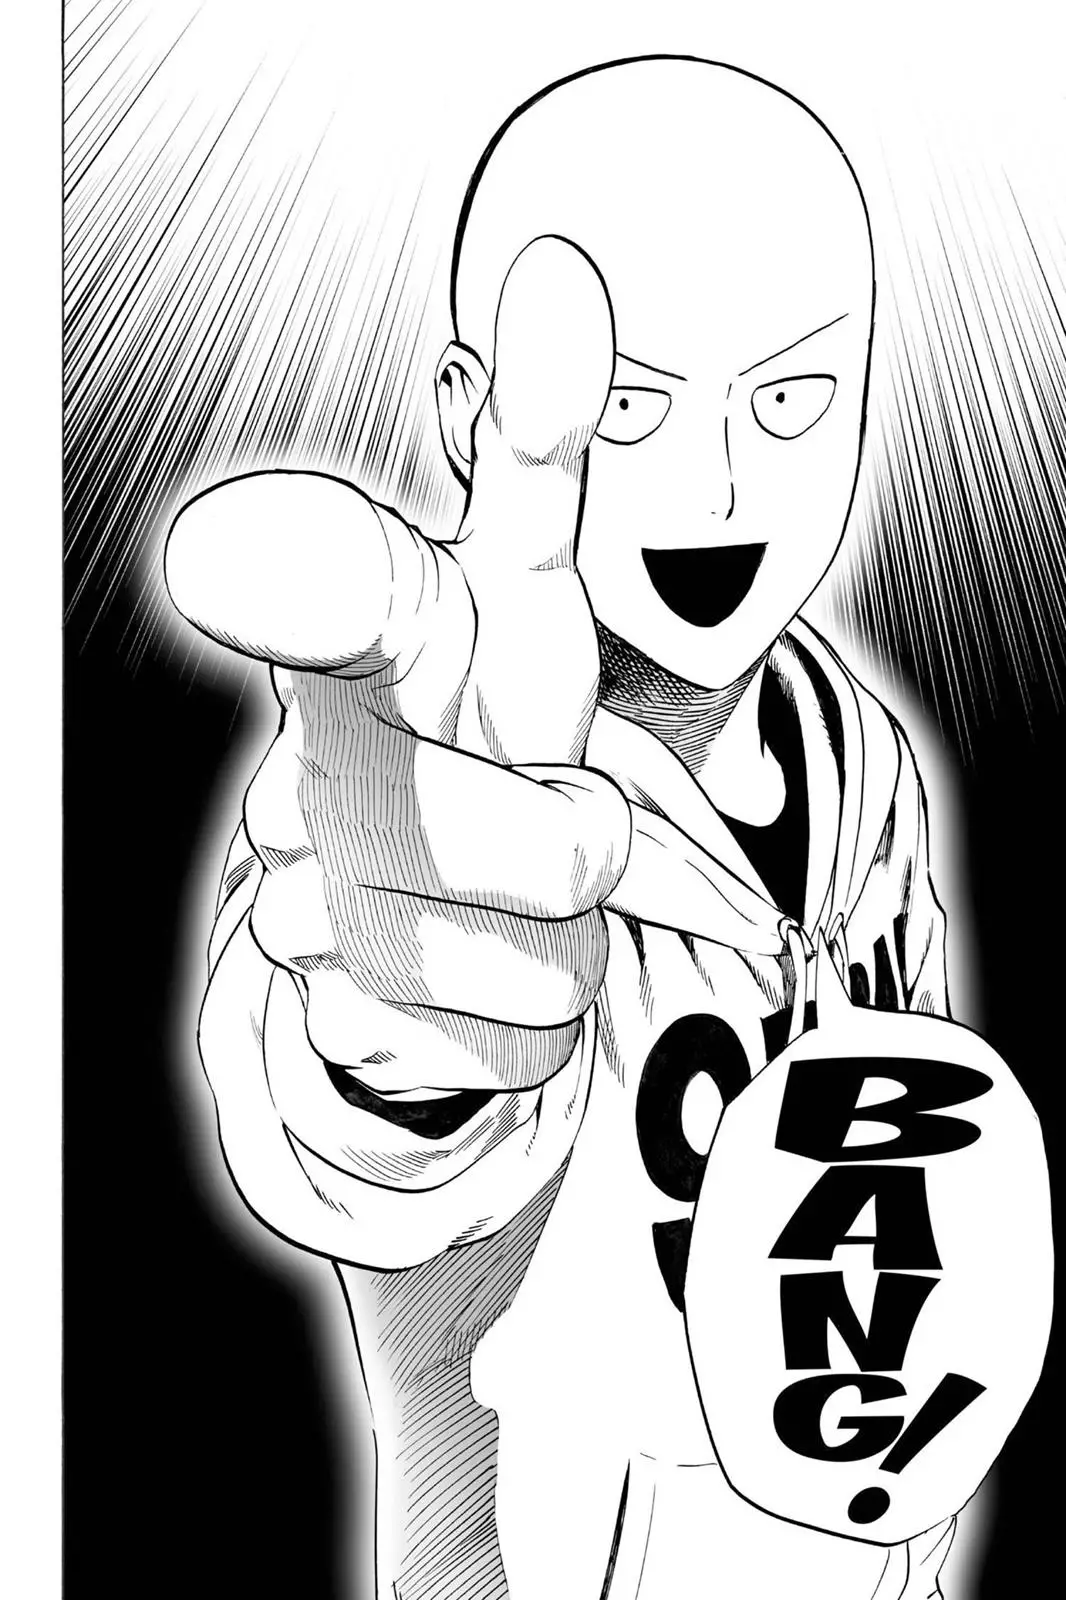 One Punch Man Chapter 37.7, READ One Punch Man Chapter 37.7 ONLINE, lost in the cloud genre,lost in the cloud gif,lost in the cloud girl,lost in the cloud goods,lost in the cloud goodreads,lost in the cloud,lost ark cloud gaming,lost odyssey cloud gaming,lost in the cloud fanart,lost in the cloud fanfic,lost in the cloud fandom,lost in the cloud first kiss,lost in the cloud font,lost in the cloud ending,lost in the cloud episode 97,lost in the cloud edit,lost in the cloud explained,lost in the cloud dog,lost in the cloud discord server,lost in the cloud desktop wallpaper,lost in the cloud drawing,can't find my cloud on network,lost in the cloud characters,lost in the cloud chapter 93 release date,lost in the cloud birthday,lost in the cloud birthday art,lost in the cloud background,lost in the cloud banner,lost in the clouds meaning,what is the black cloud in lost,lost in the cloud ao3,lost in the cloud anime,lost in the cloud art,lost in the cloud author twitter,lost in the cloud author instagram,lost in the cloud artist,lost in the cloud acrylic stand,lost in the cloud artist twitter,lost in the cloud art style,lost in the cloud analysis